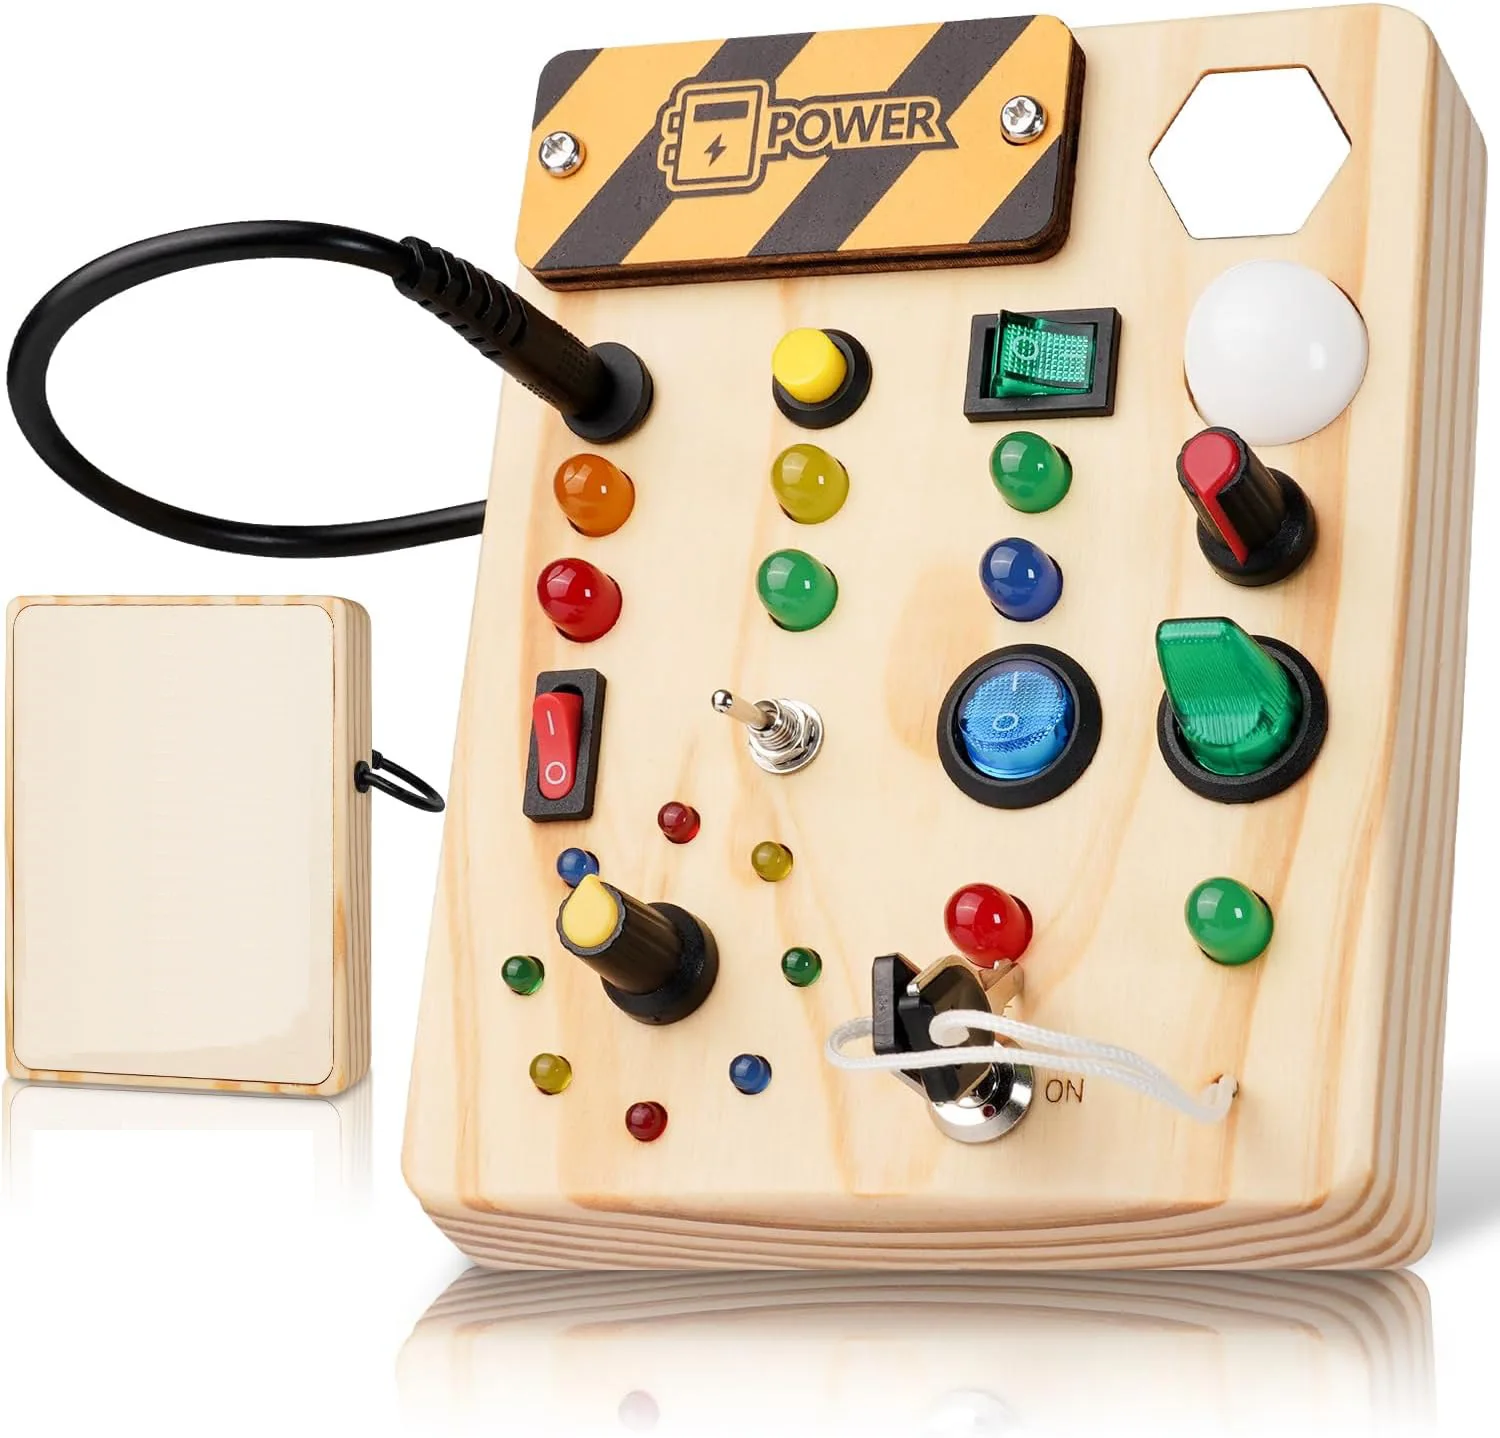 

Educational Toddler Pluggable Wires Electric Sensory Montessori Wooden Busy Board Toys With LED Light Switch